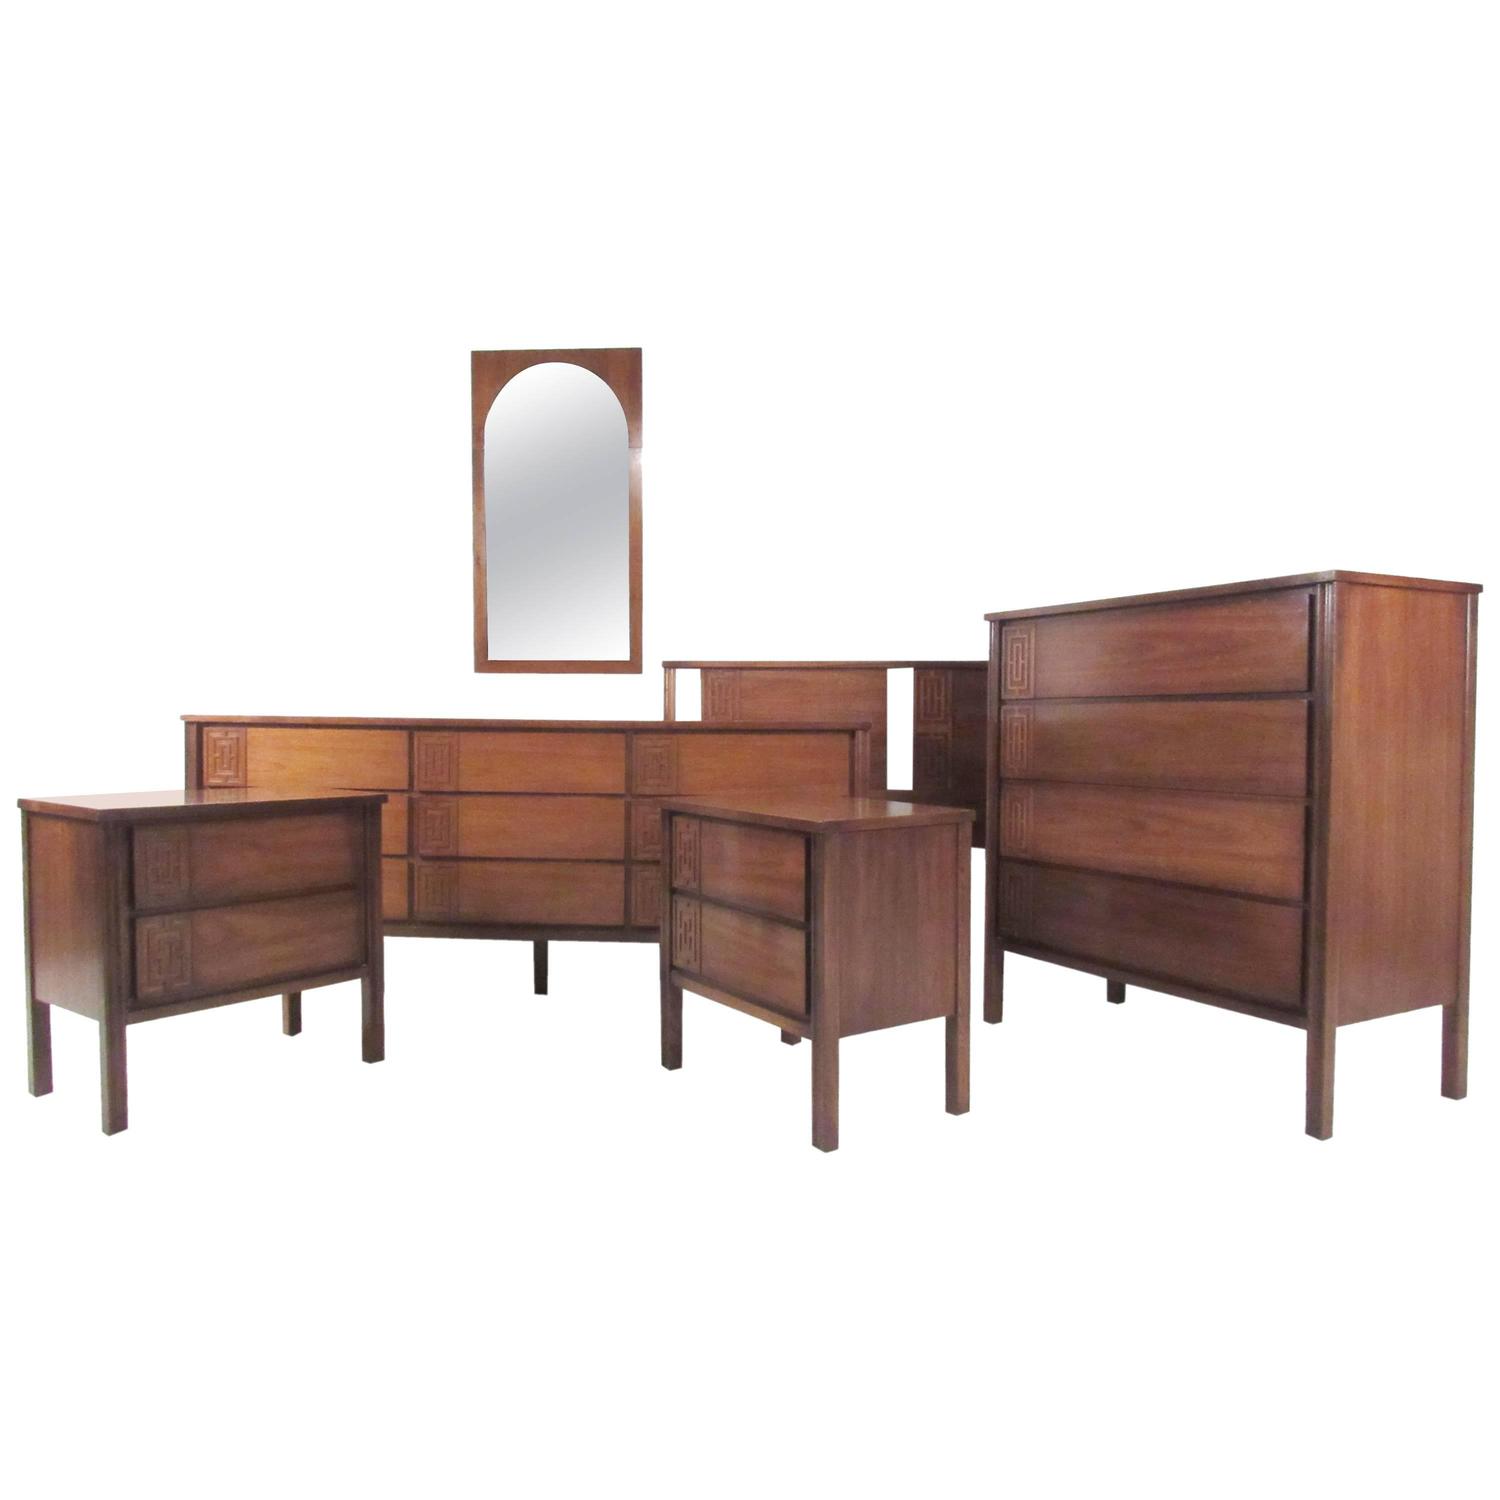 Stylish Mid-Century Modern Seven-Piece Bedroom Set For Sale at 1stdibs